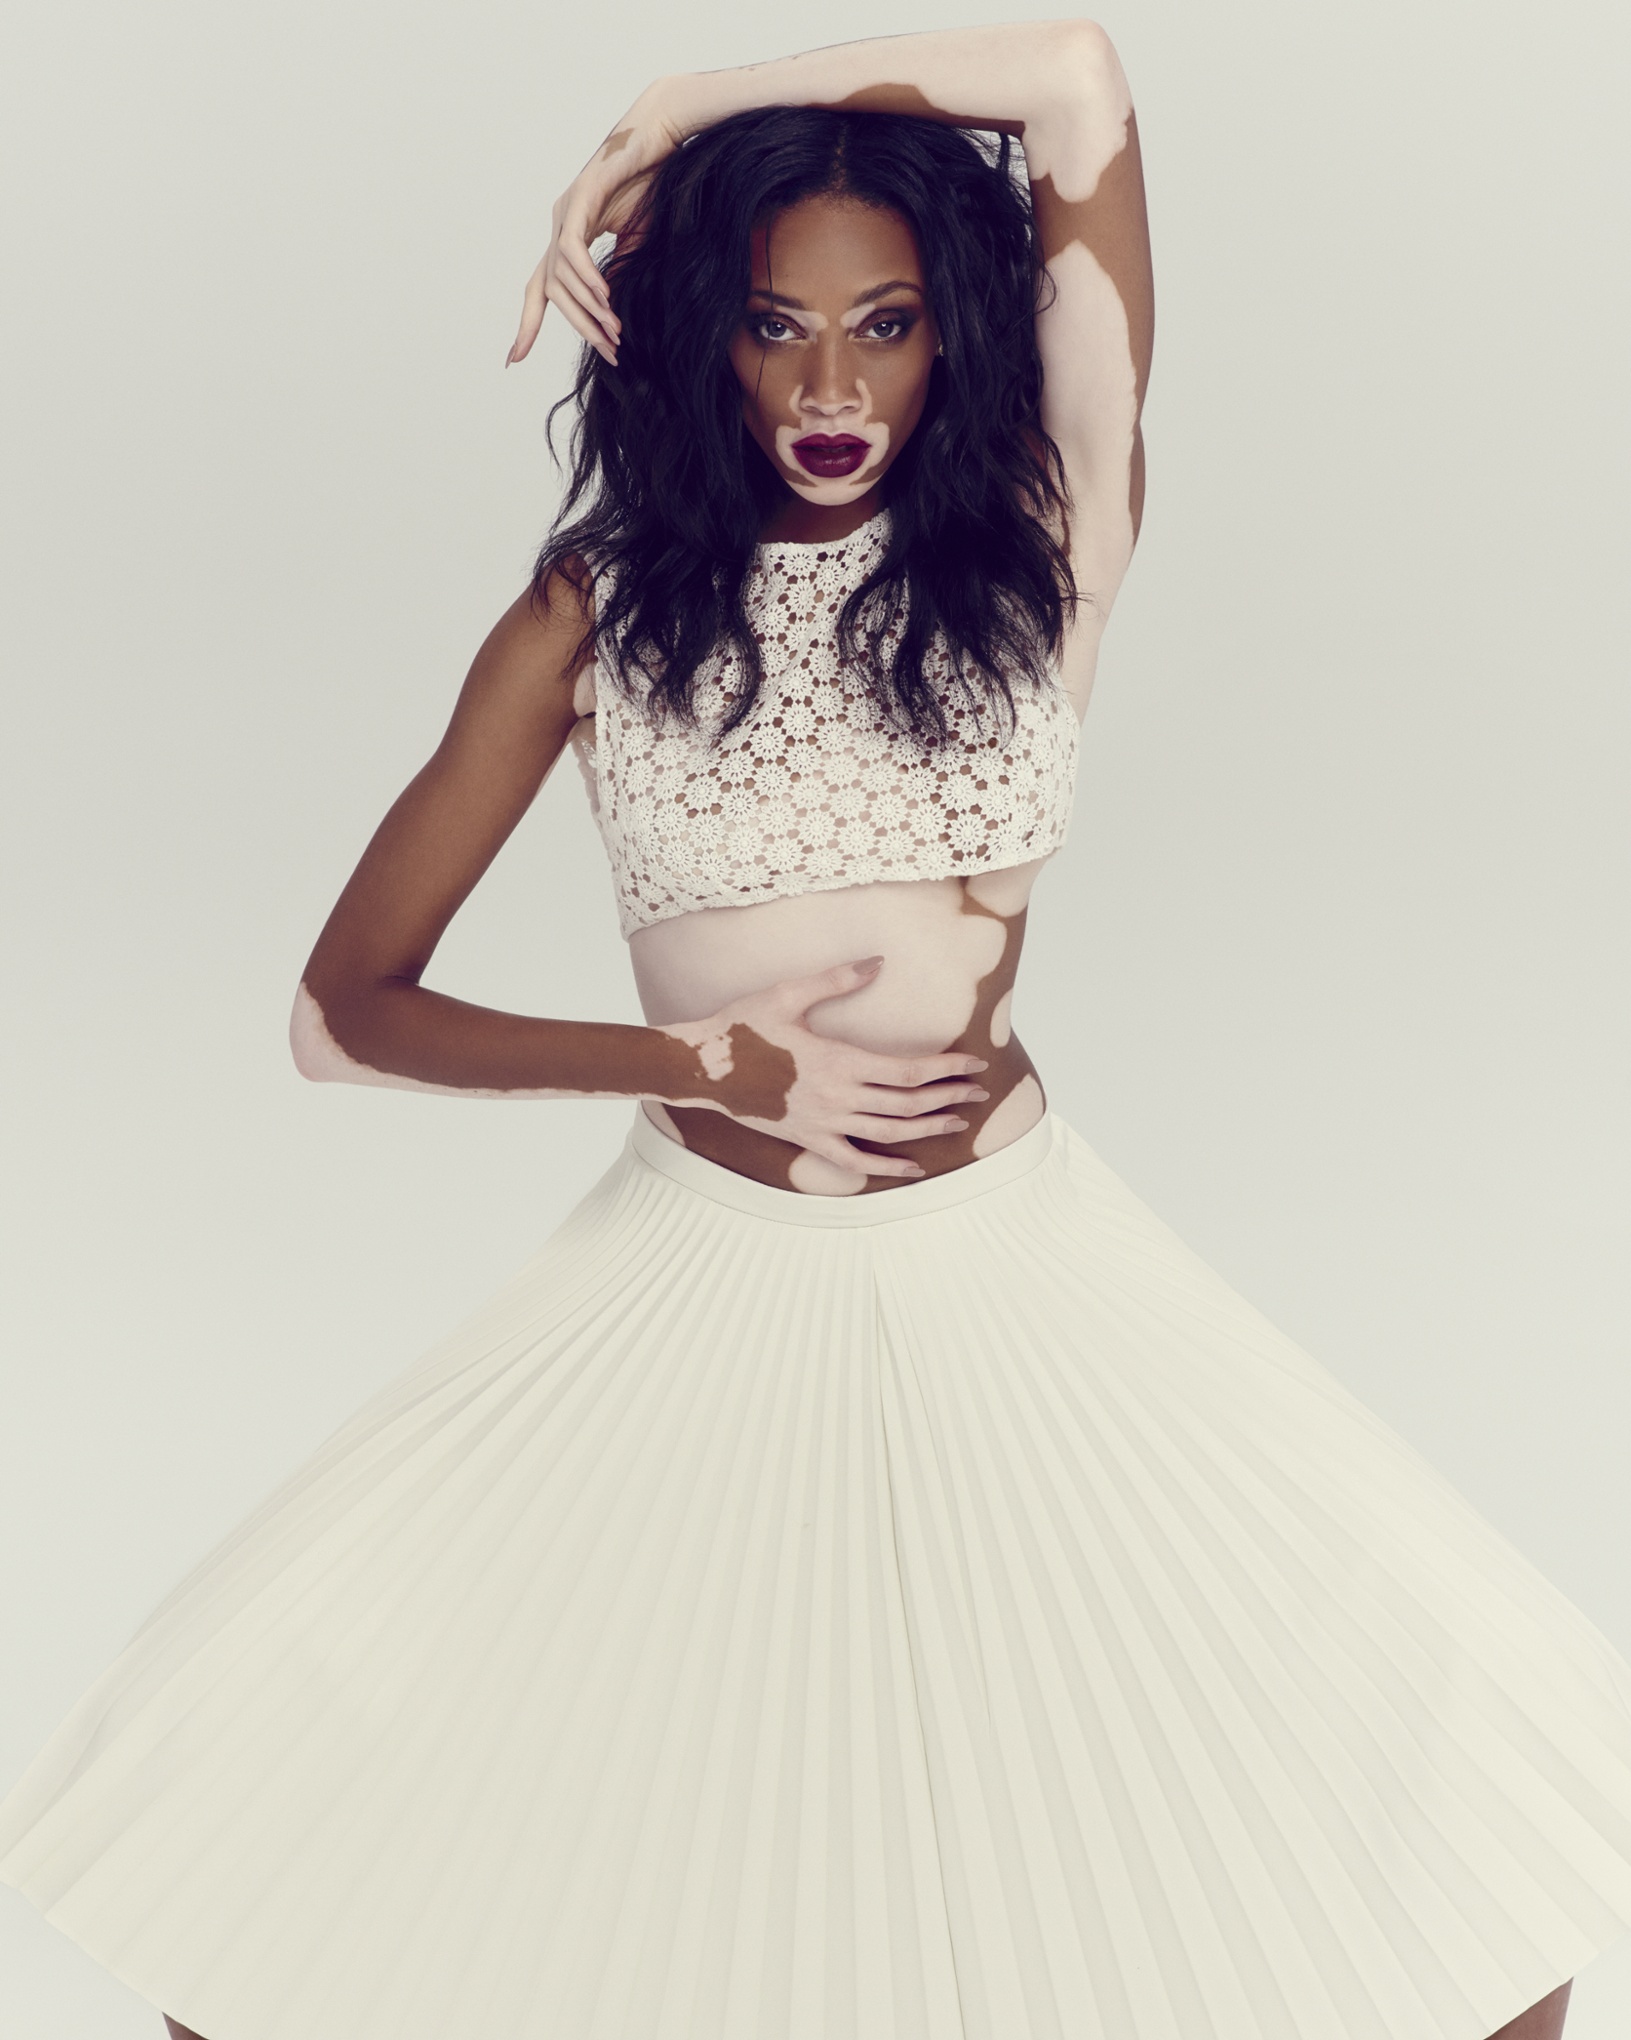 Chantelle Winnie: a model in demand – in pictures | Global | The Guardian